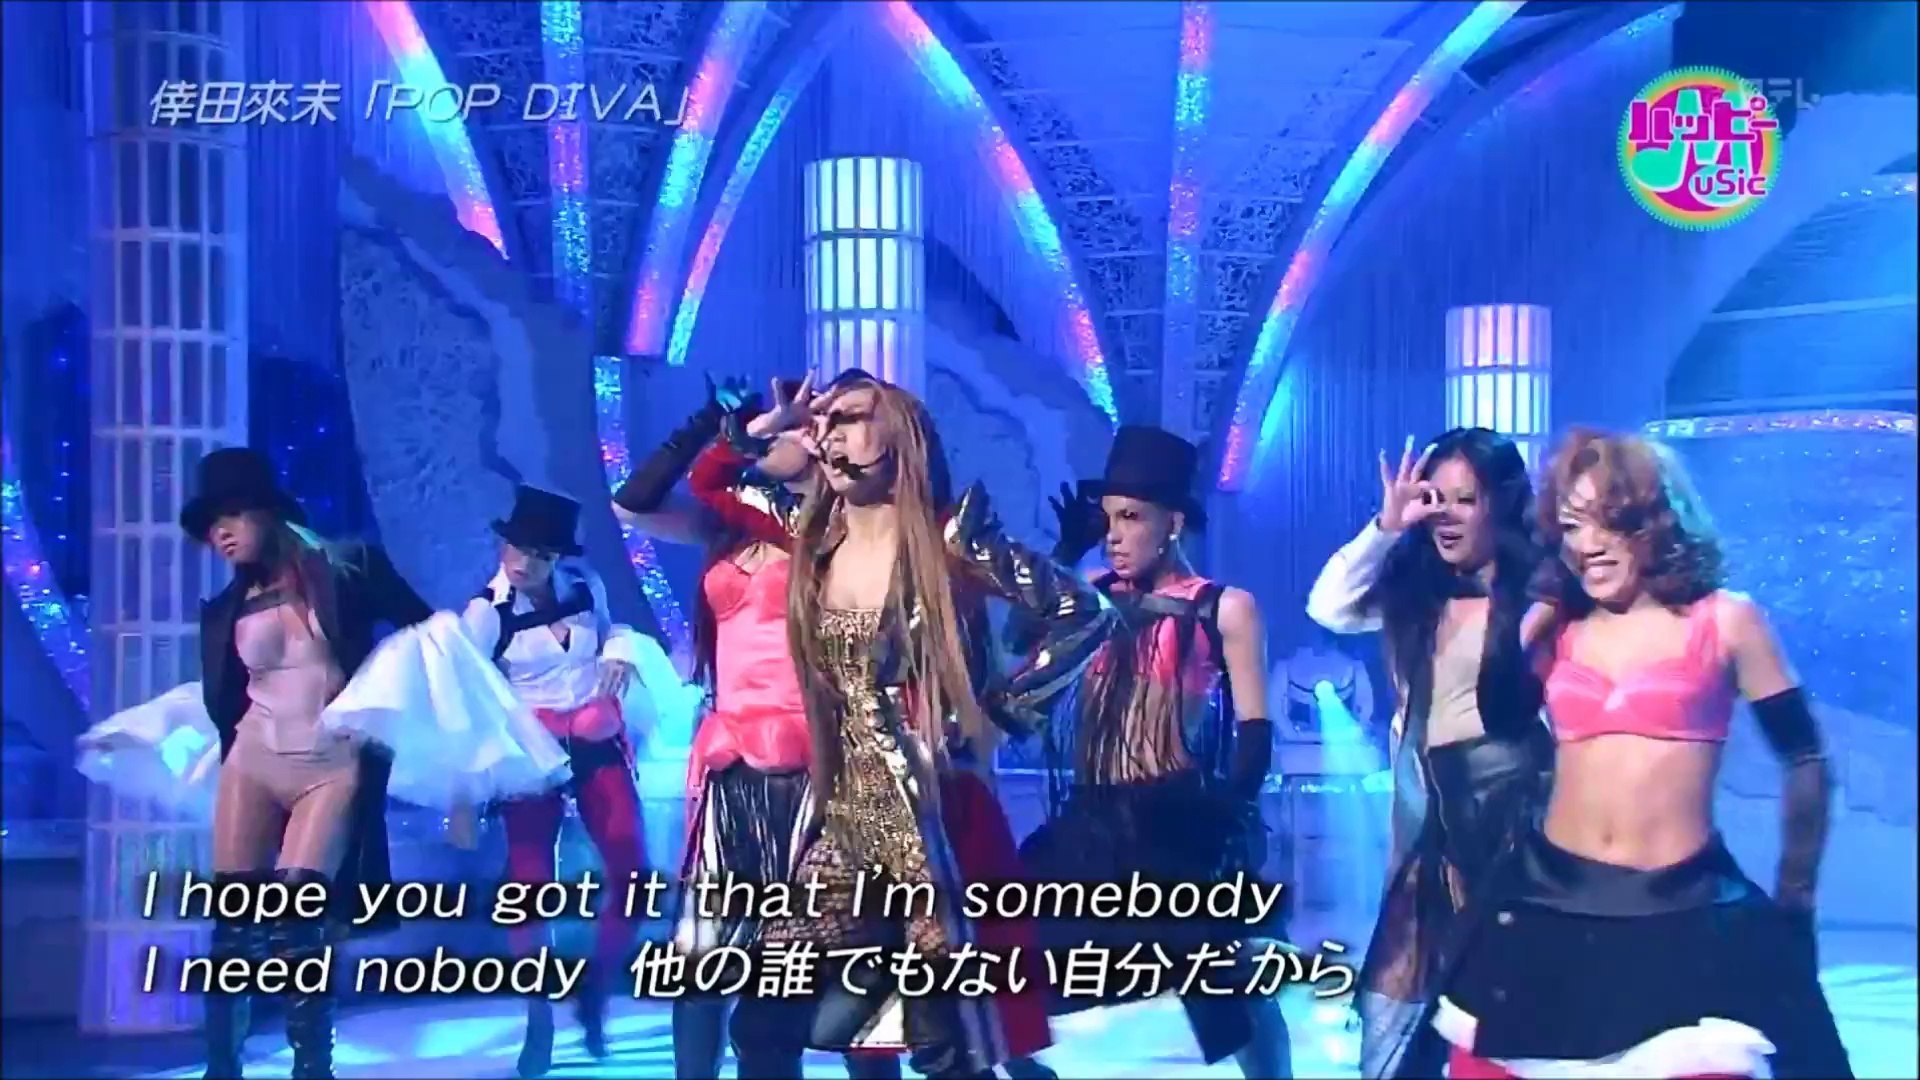 Pop Diva Live At Happy Music ハッピーmusic 05 02 09 Video Dailymotion